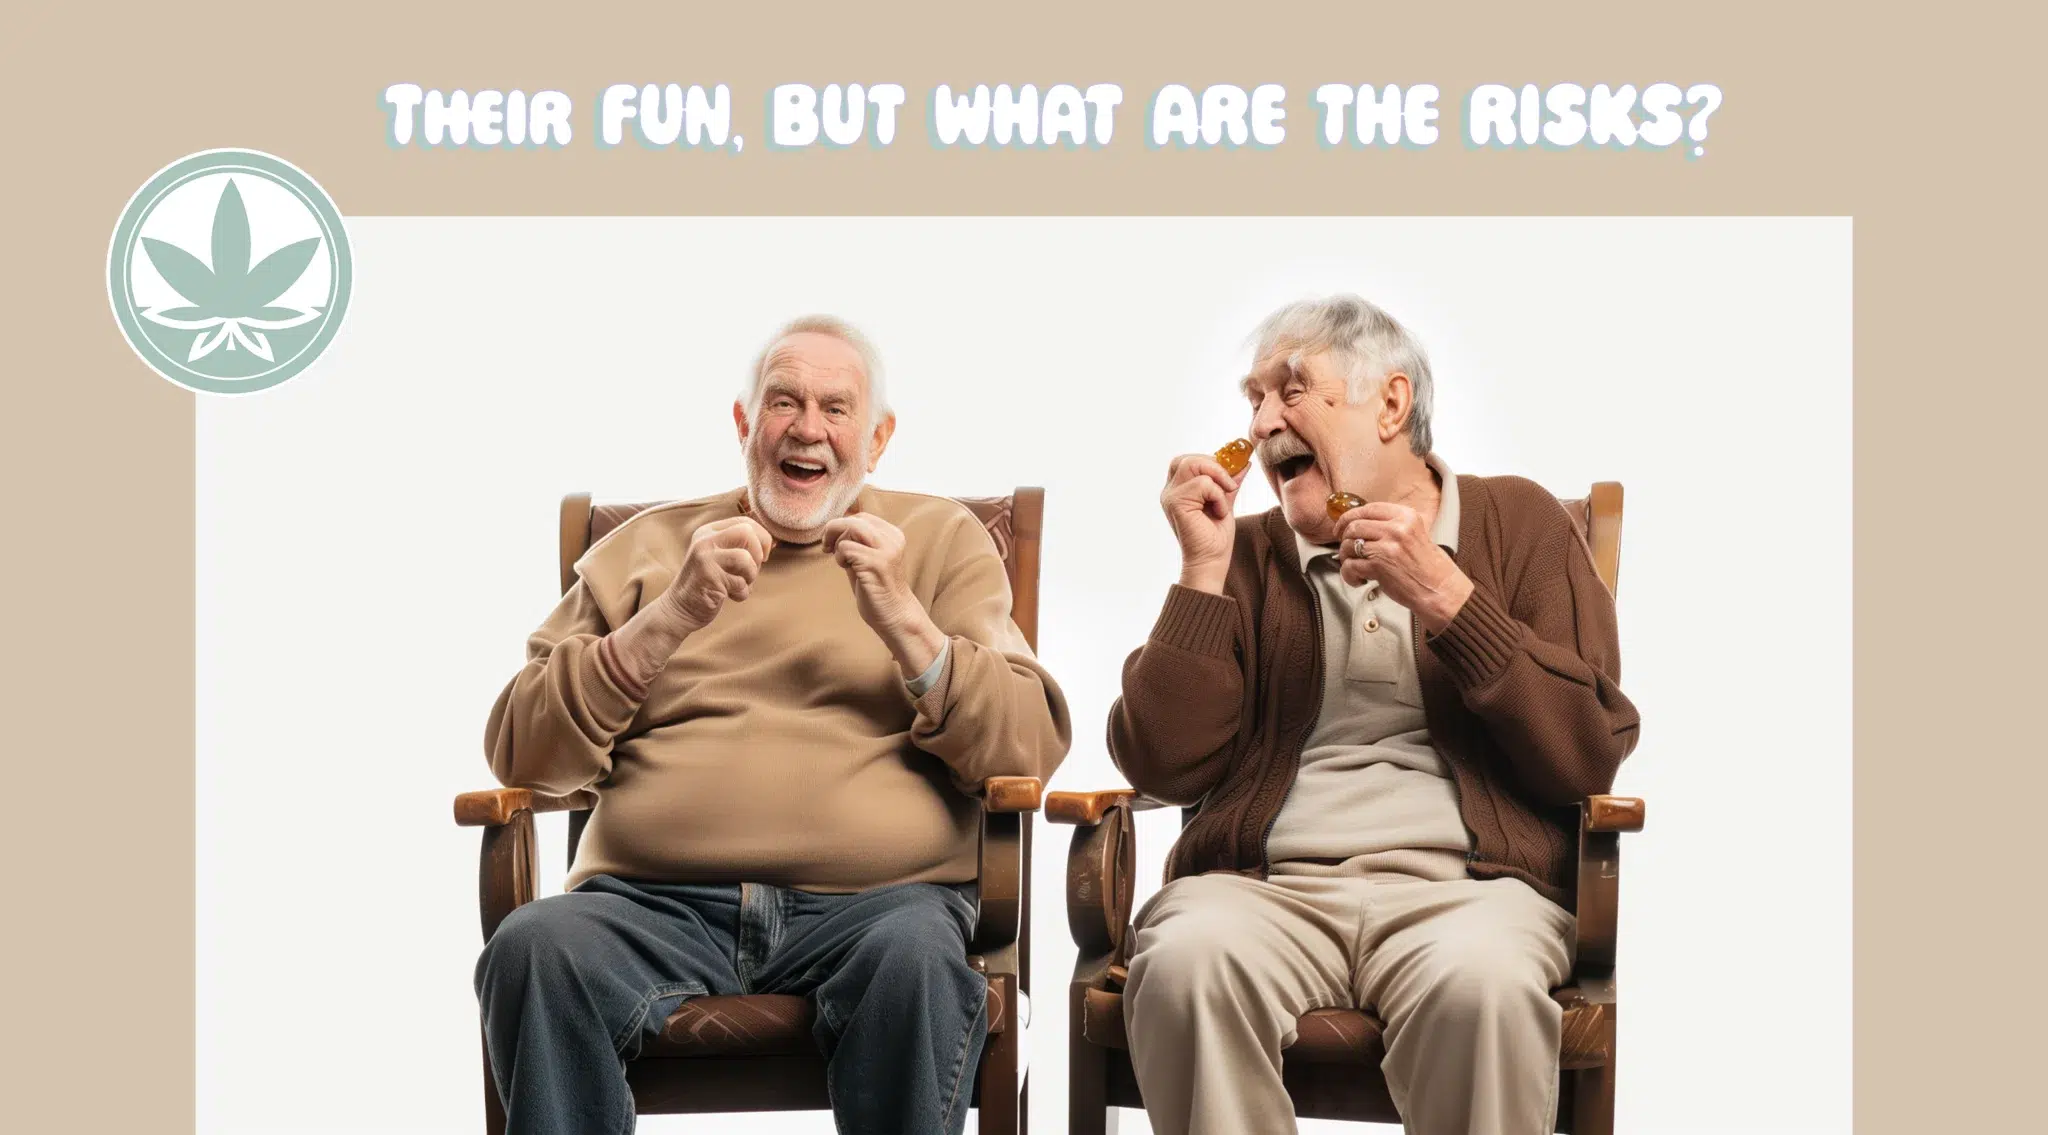 Two 65 year old men talk about the risks of edibles and laugh